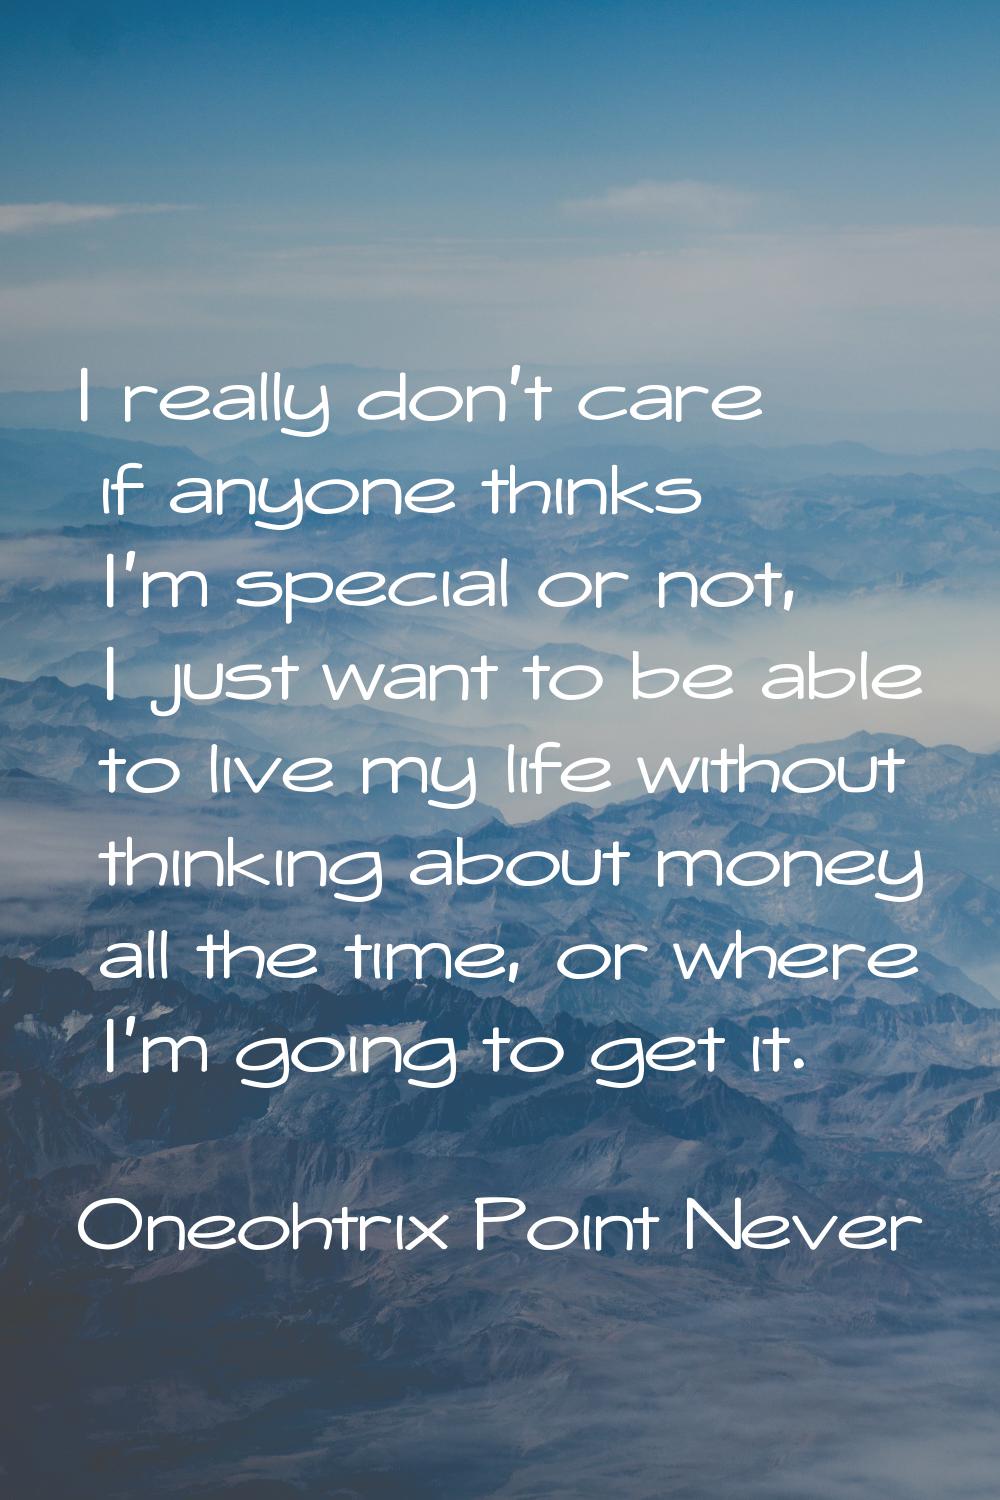 I really don't care if anyone thinks I'm special or not, I just want to be able to live my life wit